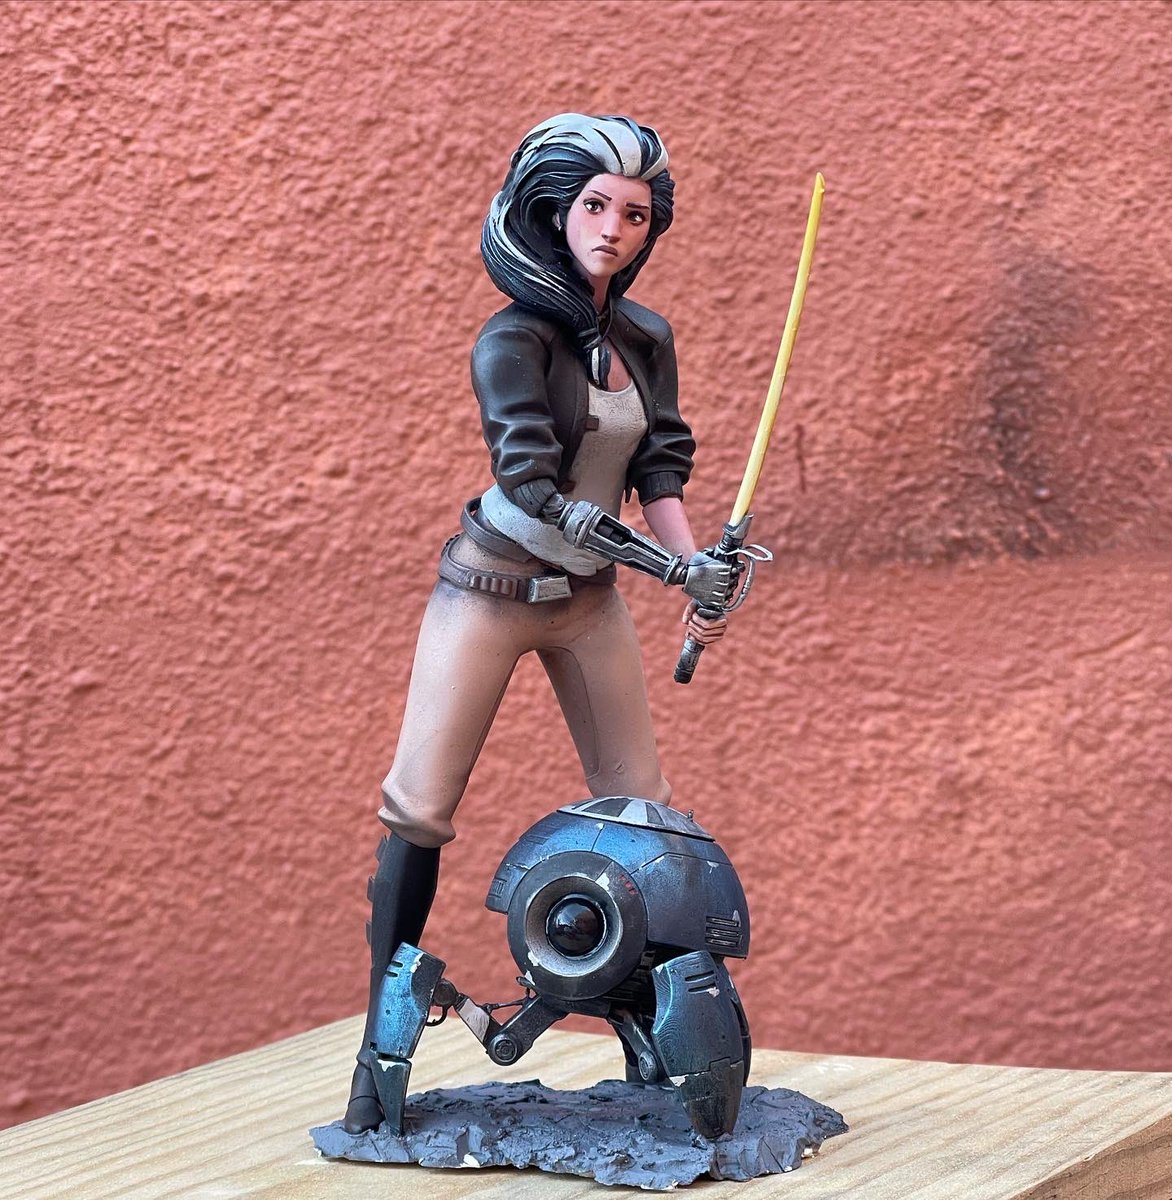 Lola’s 3D printed and painted by me for @rodrigoblaas .
So much fun to paint animated characters too!.
.
.
.
.
.
#starwars #visions2 #sith #starwarsvisions